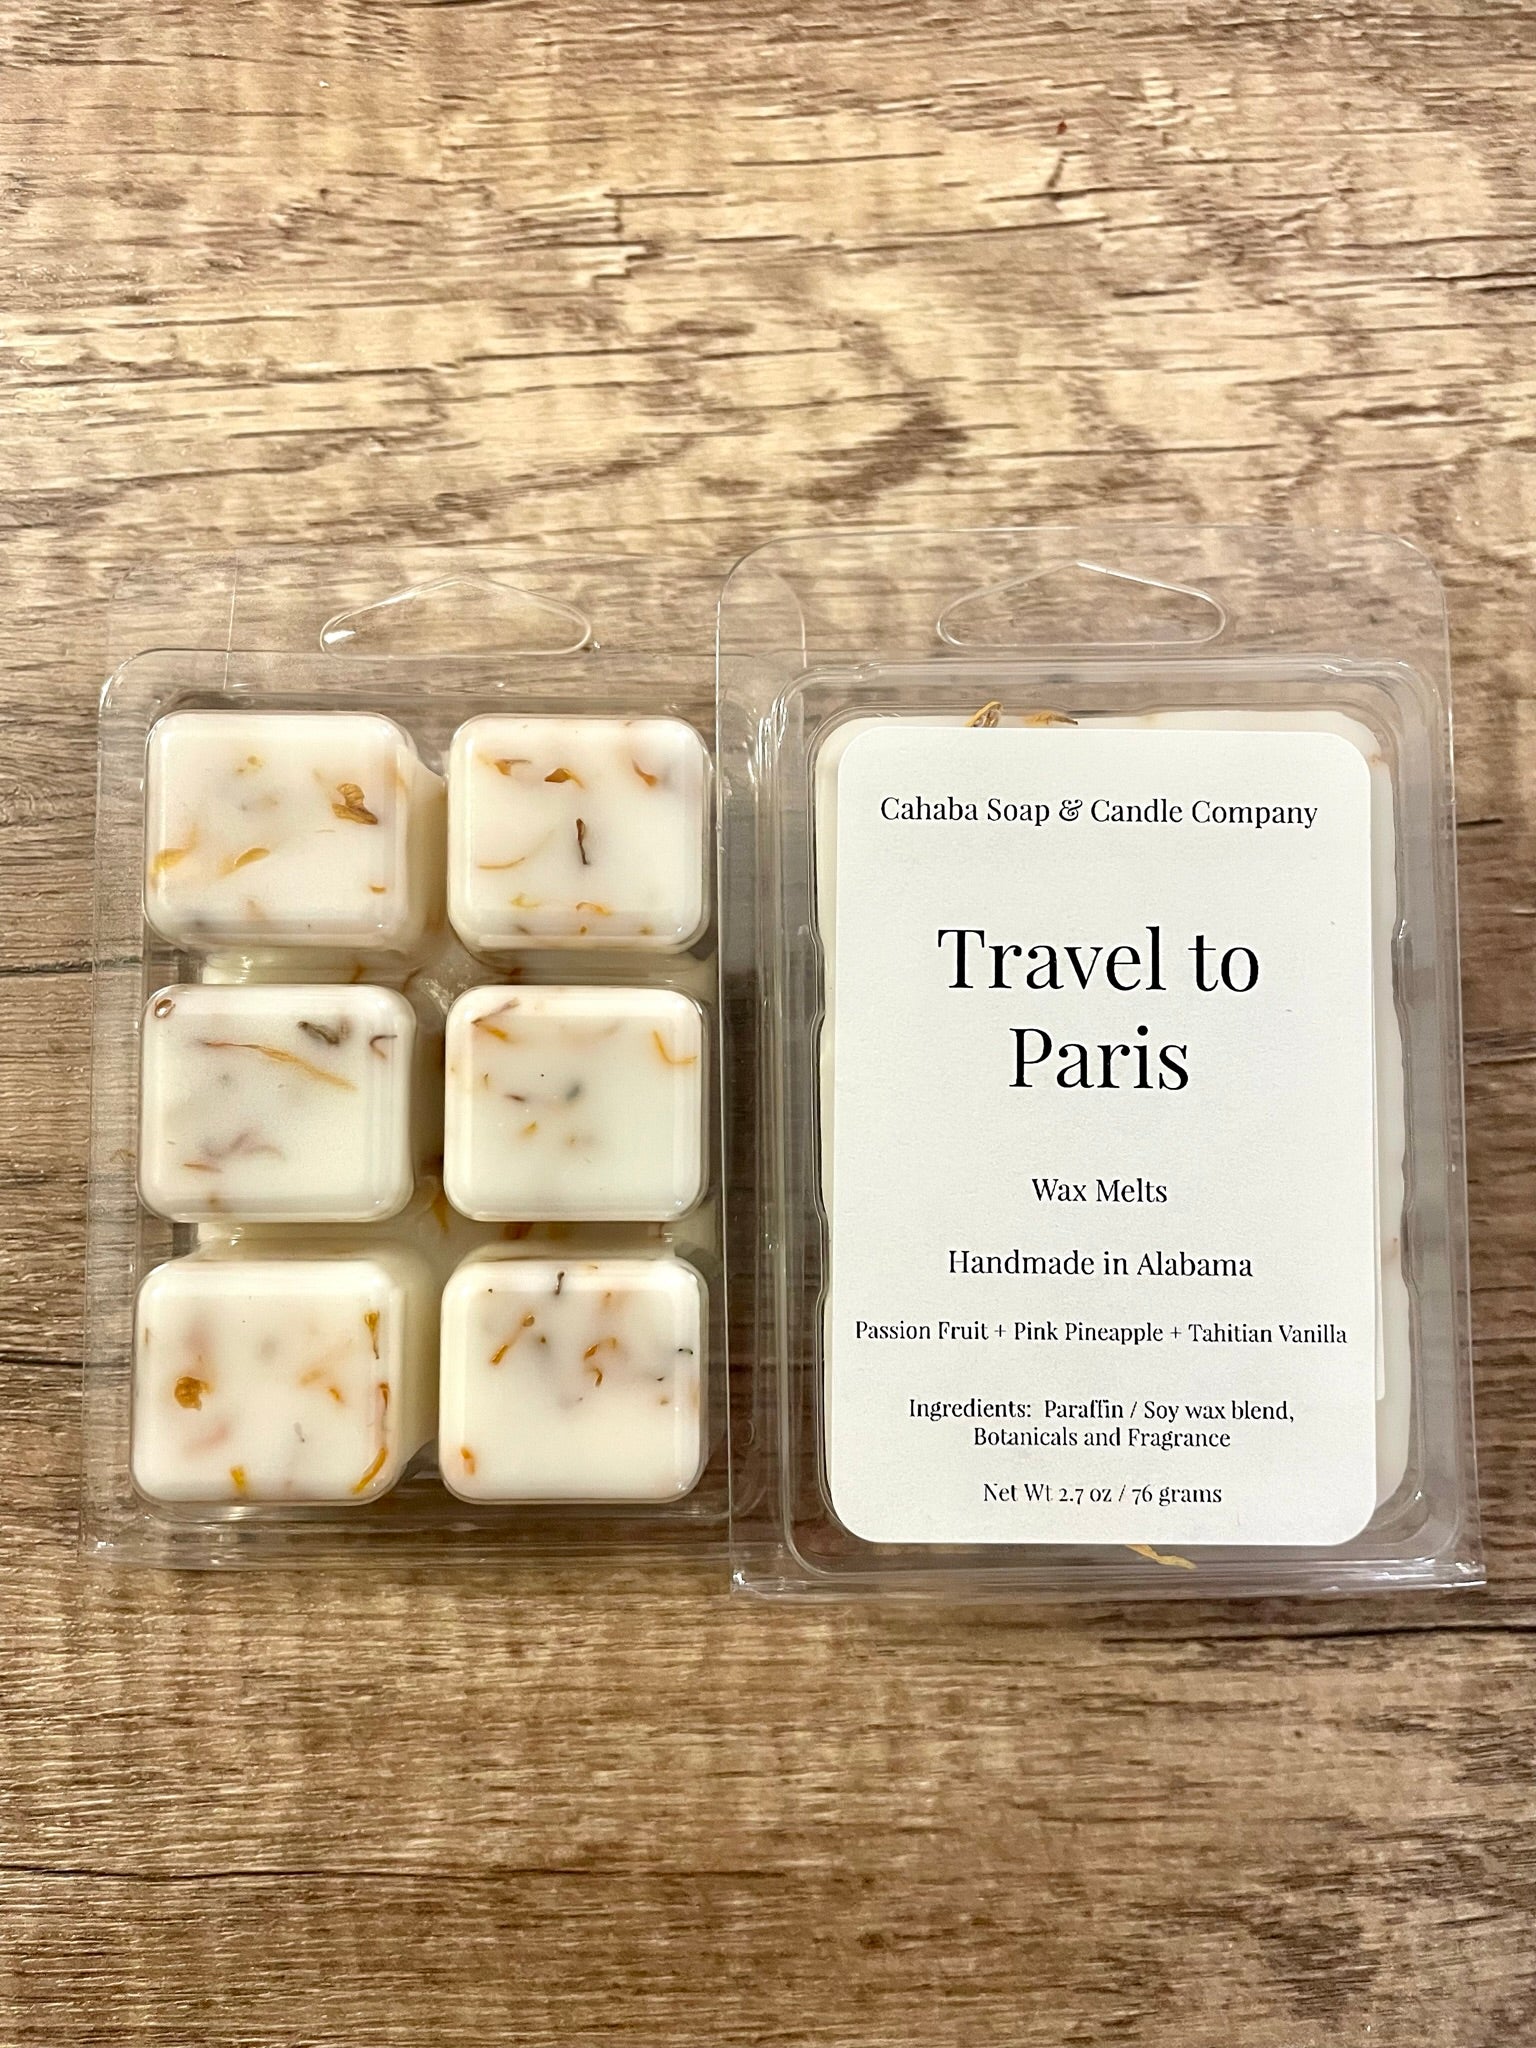 Travel To Paris - Cahaba Soap and Candle Company